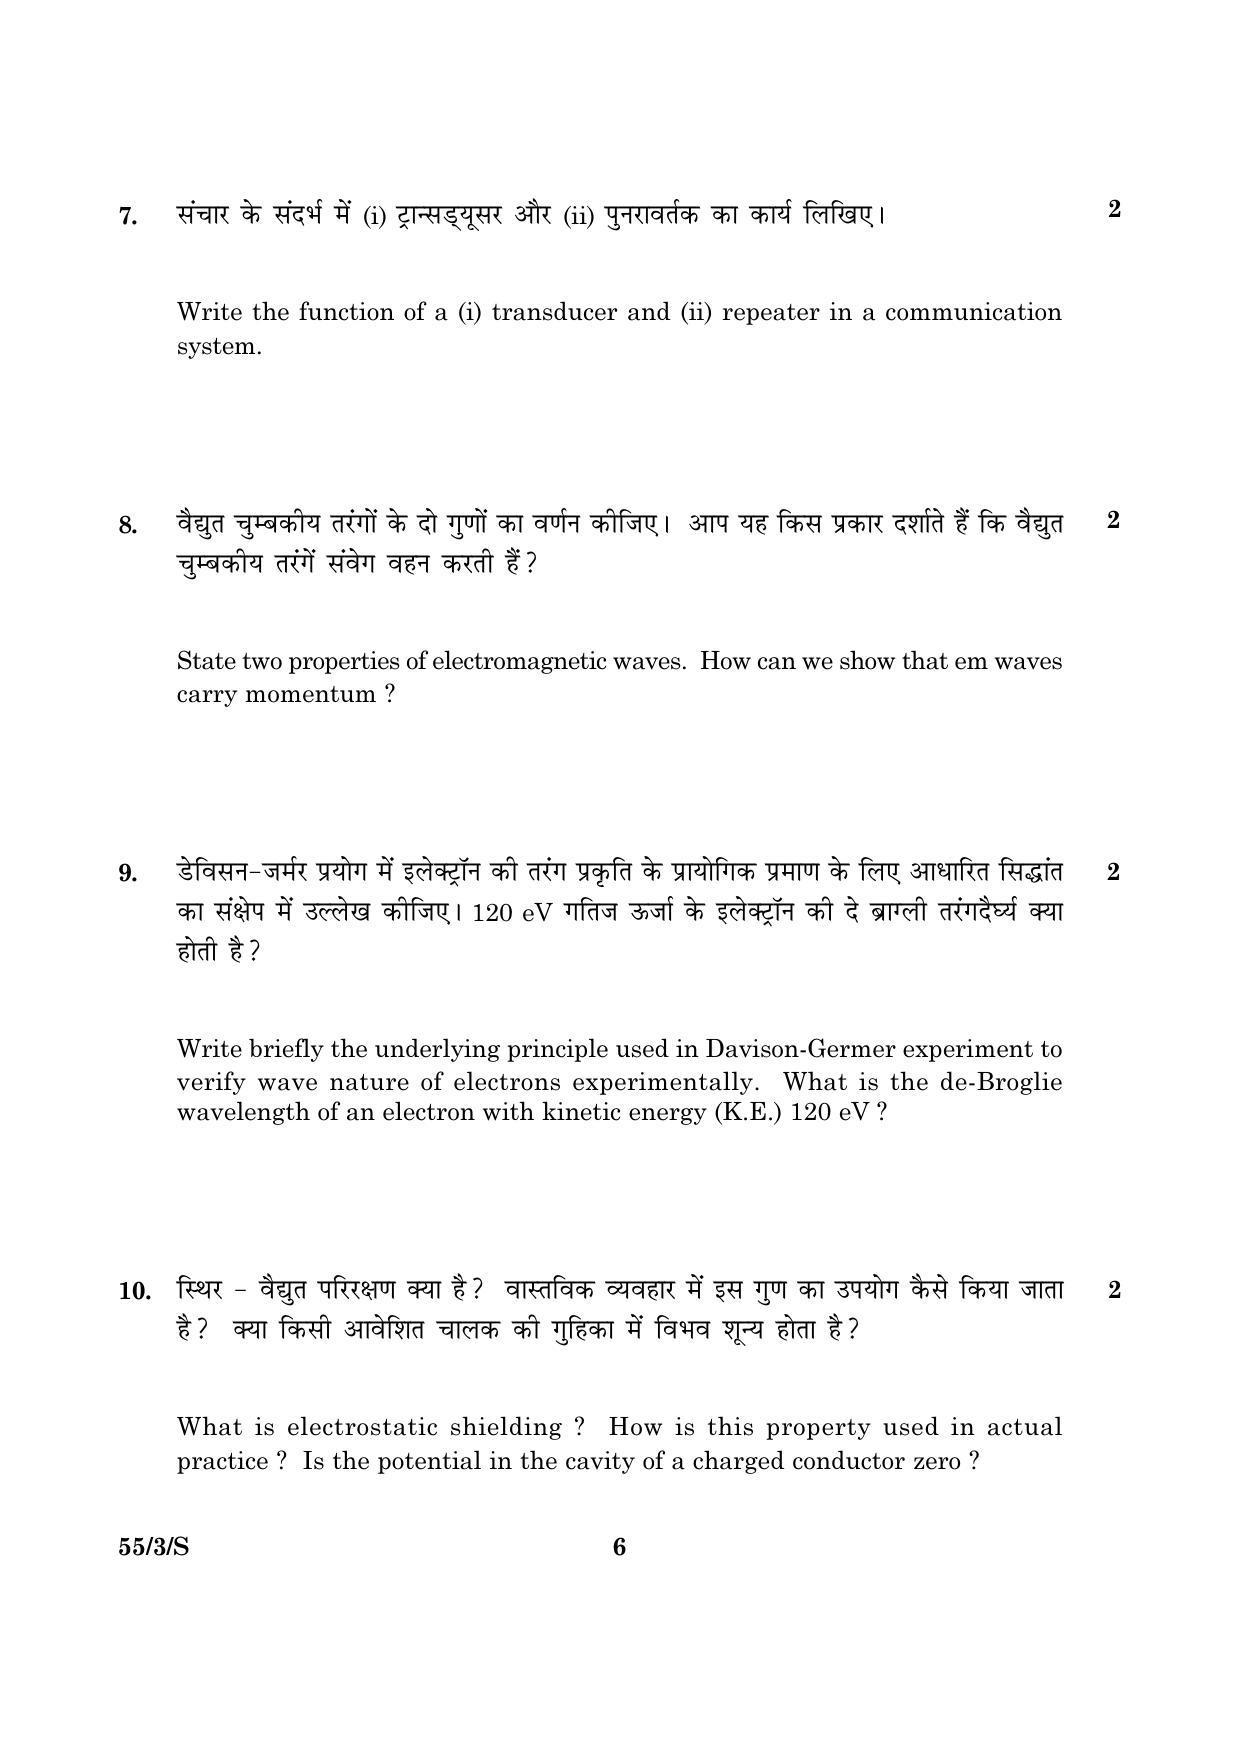 CBSE Class 12 055 Set 3 S Physics Theory 2016 Question Paper - Page 6